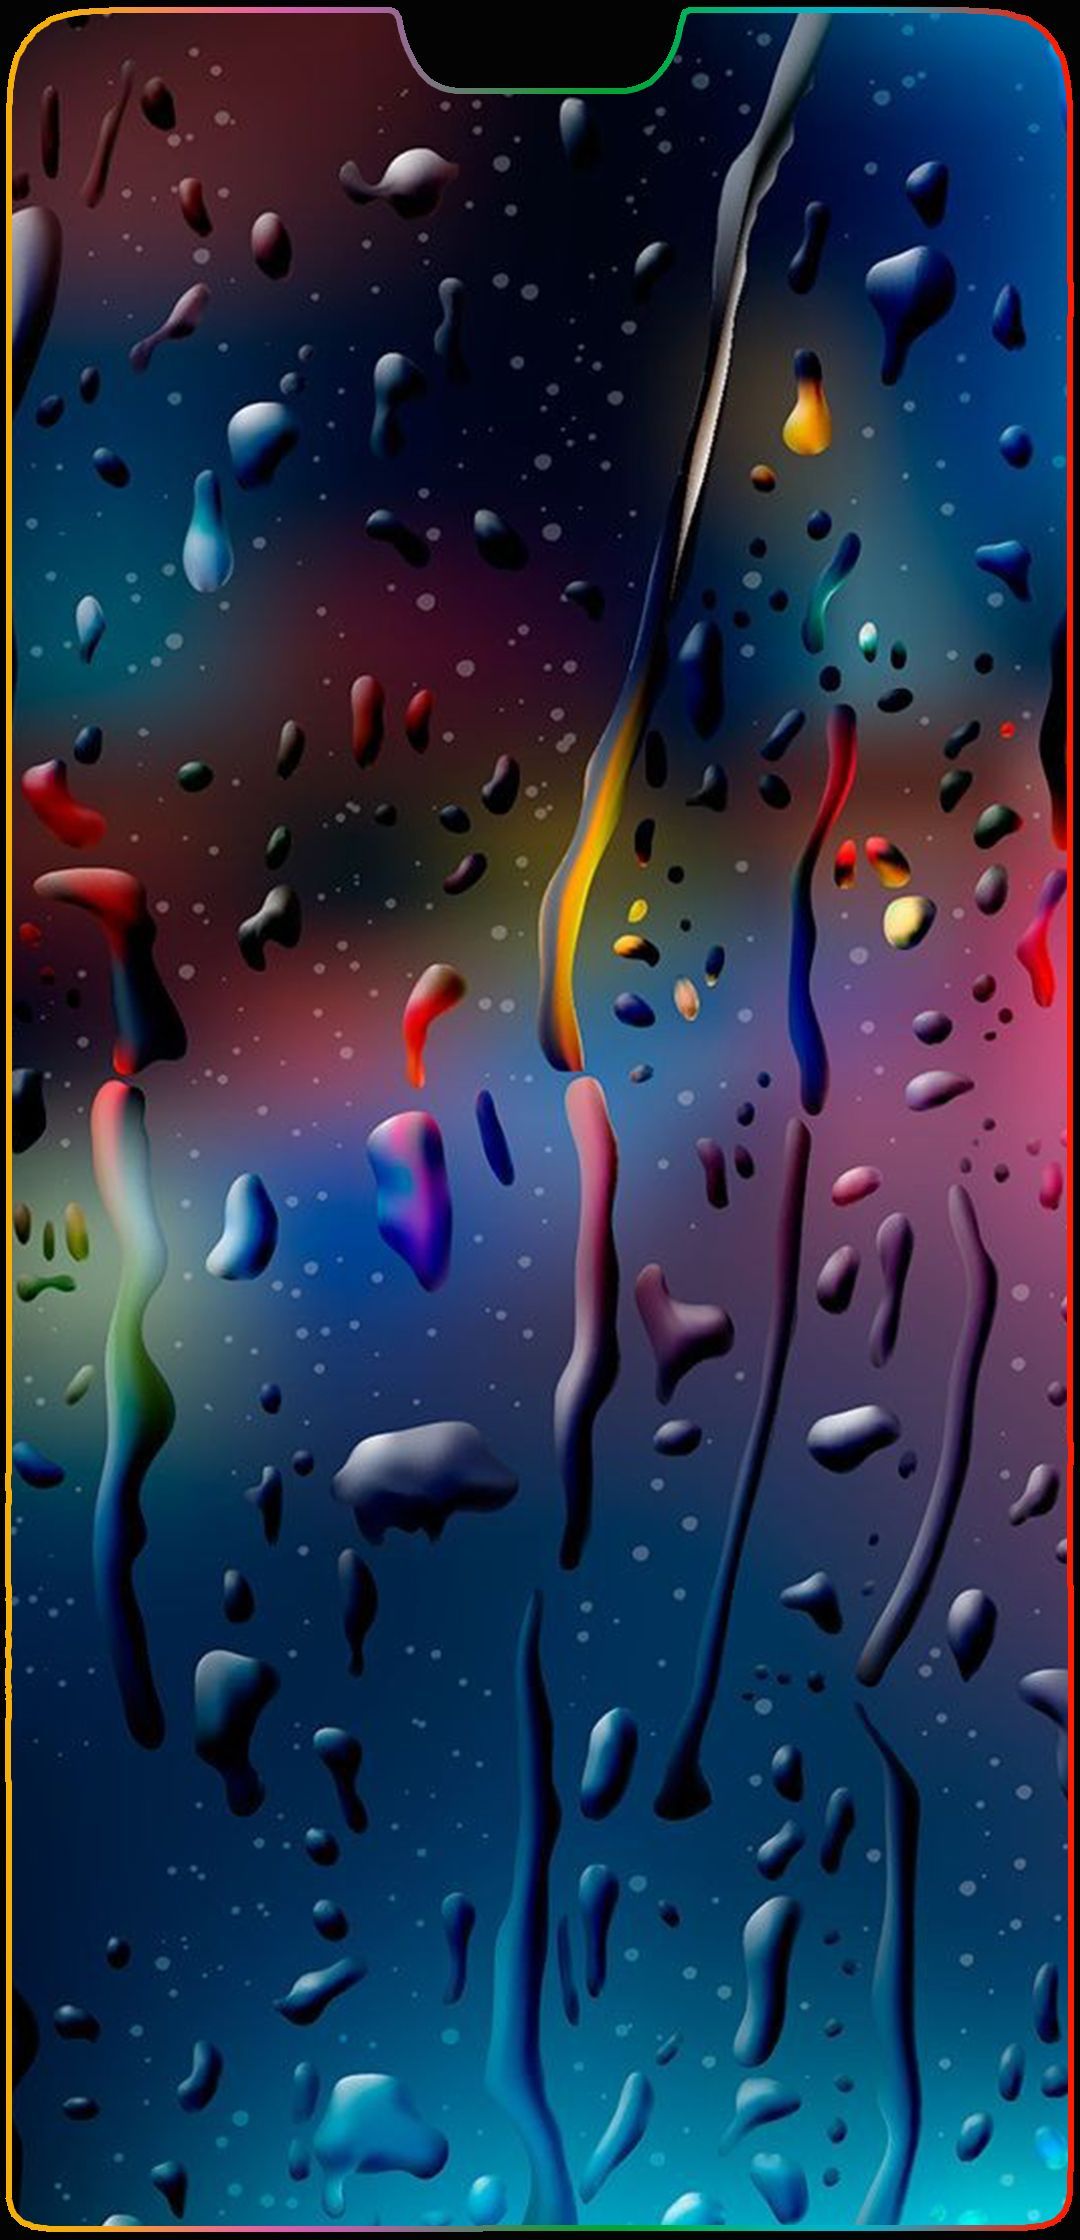 Free download Best 181 Dot Notch wallpapers for Redmi Note 7 Pro Hide your  [1280x720] for your Desktop, Mobile & Tablet | Explore 25+ Drop Notch  Wallpapers | Water Drop Wallpaper, Water